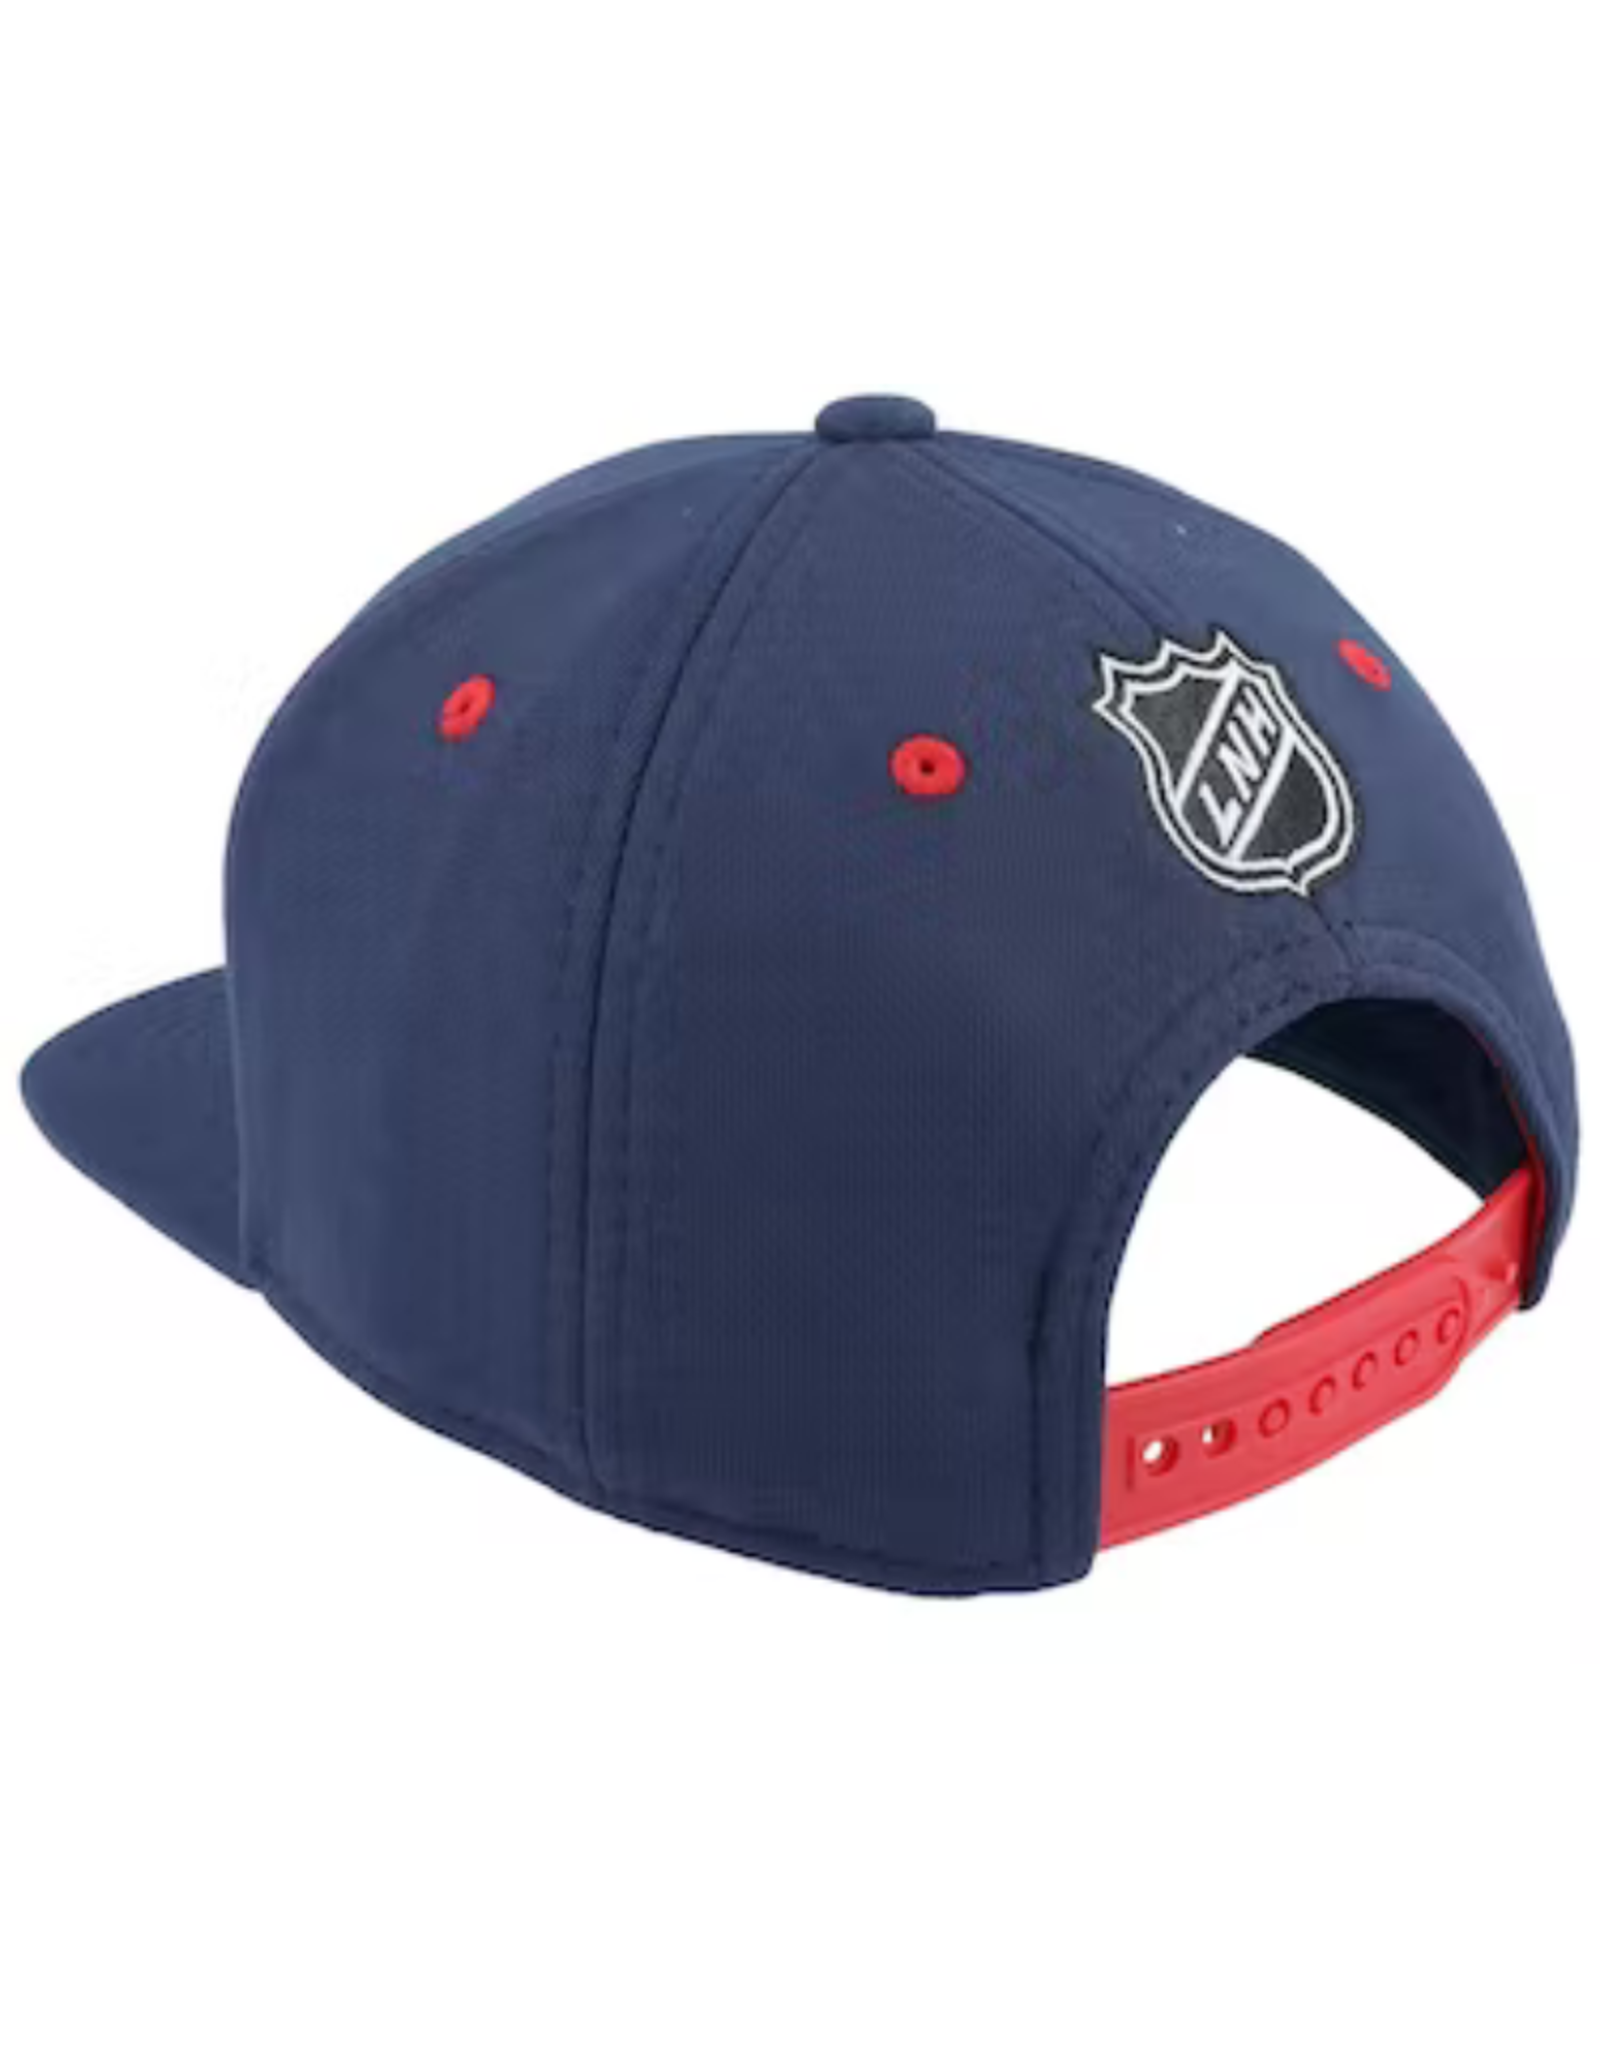 Outerstuff Youth Lifestyle Printed Adjustable Hat Montreal Canadiens